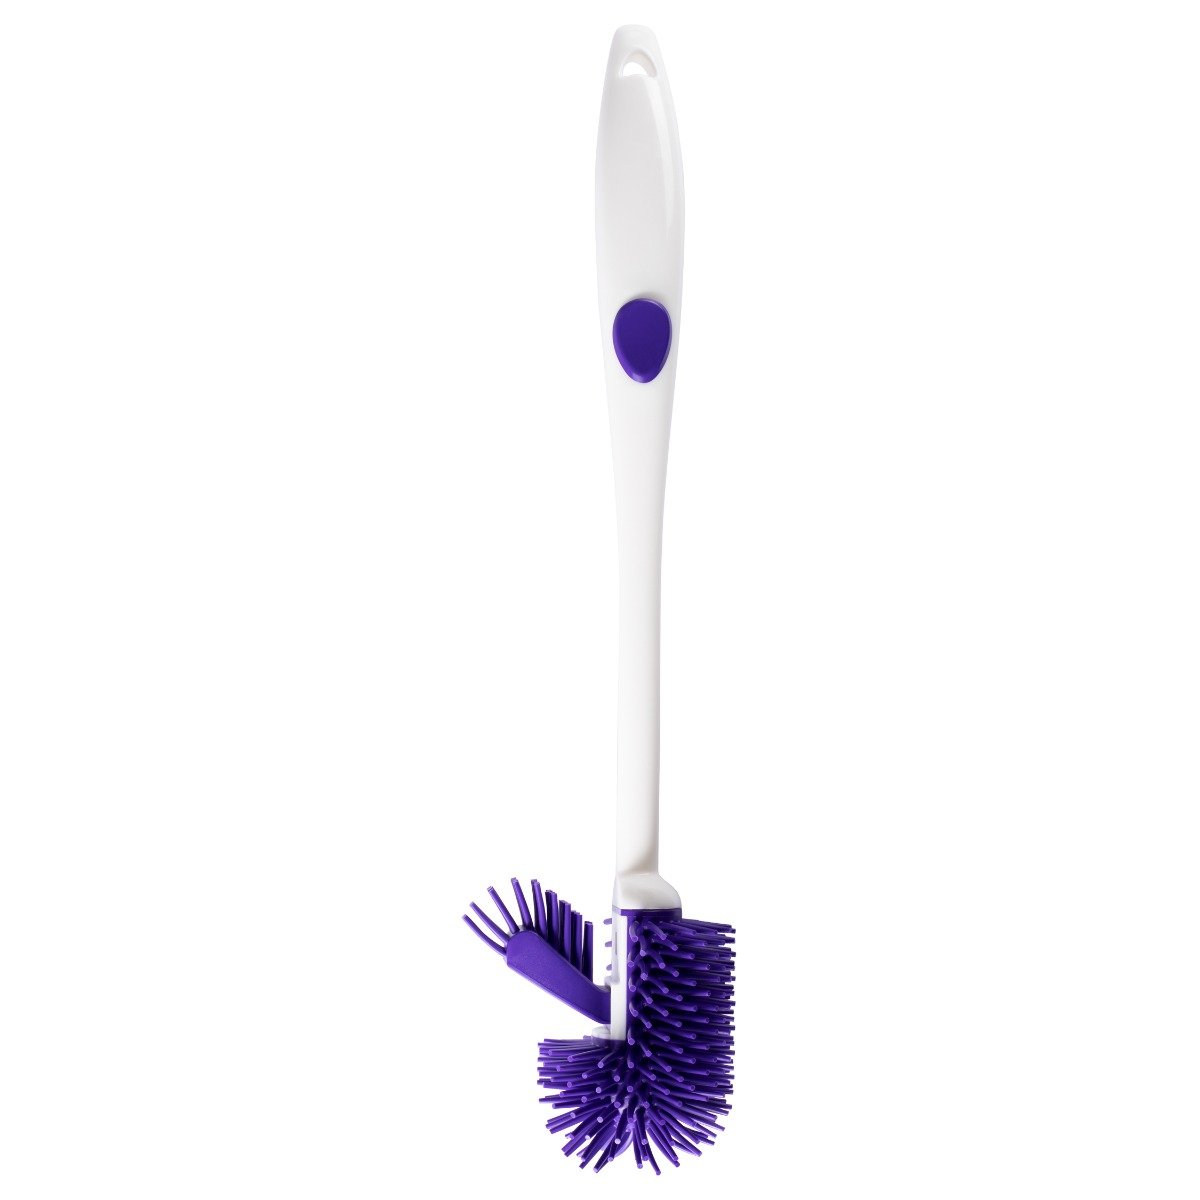 https://cdn.shopify.com/s/files/1/0430/0704/9886/products/ultimate-toilet-bowl-brush-constructed-of-durable-thermoplastic-rubber-tpr-cleaning-brushes_1200x1200.jpg?v=1596015121